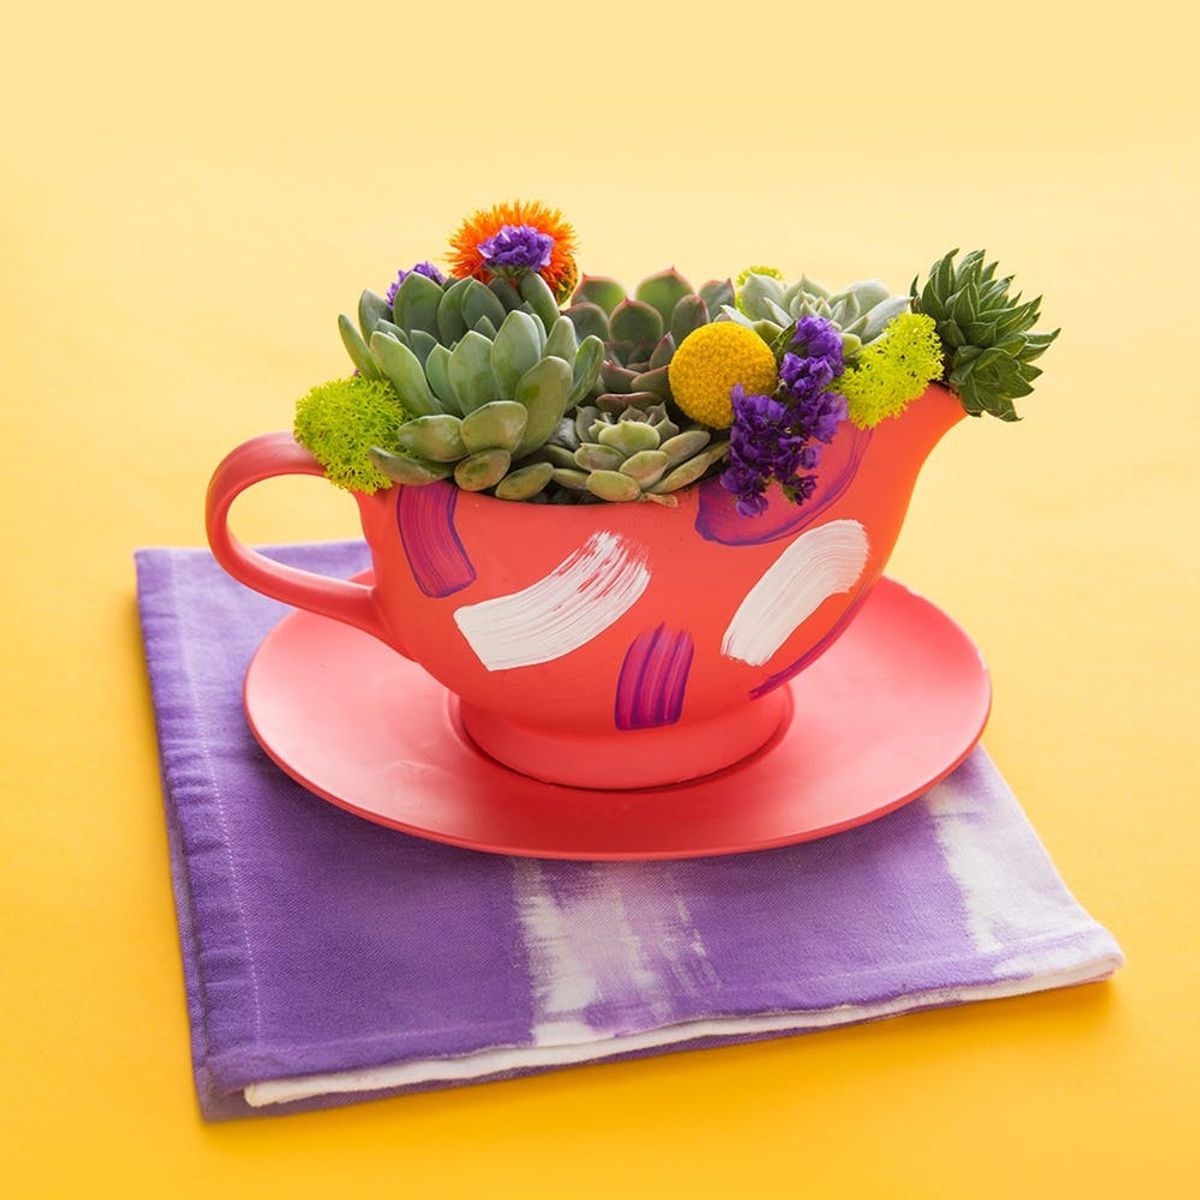 Thanksgiving Hack! How to Turn a Gravy Boat into a Succulent Planter